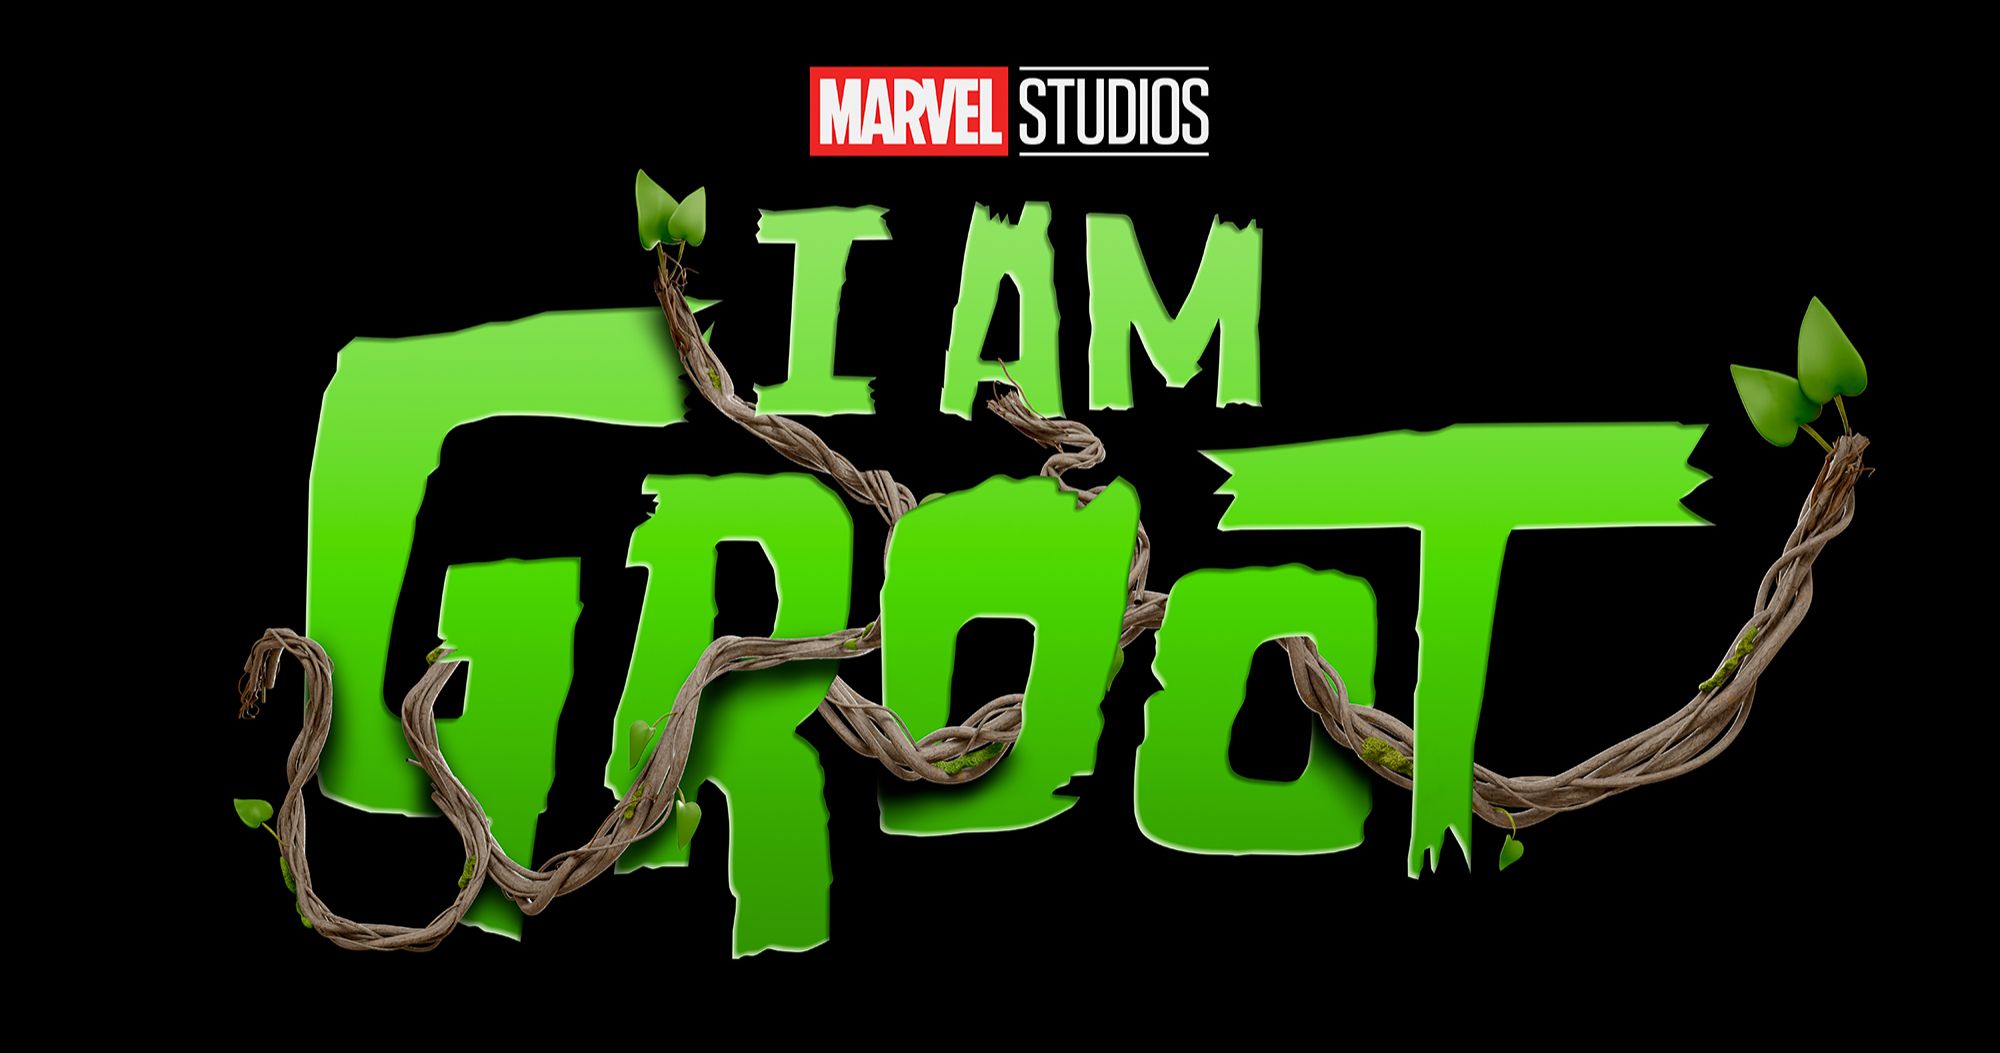 I Am Groot Shorts Are Coming to Disney+